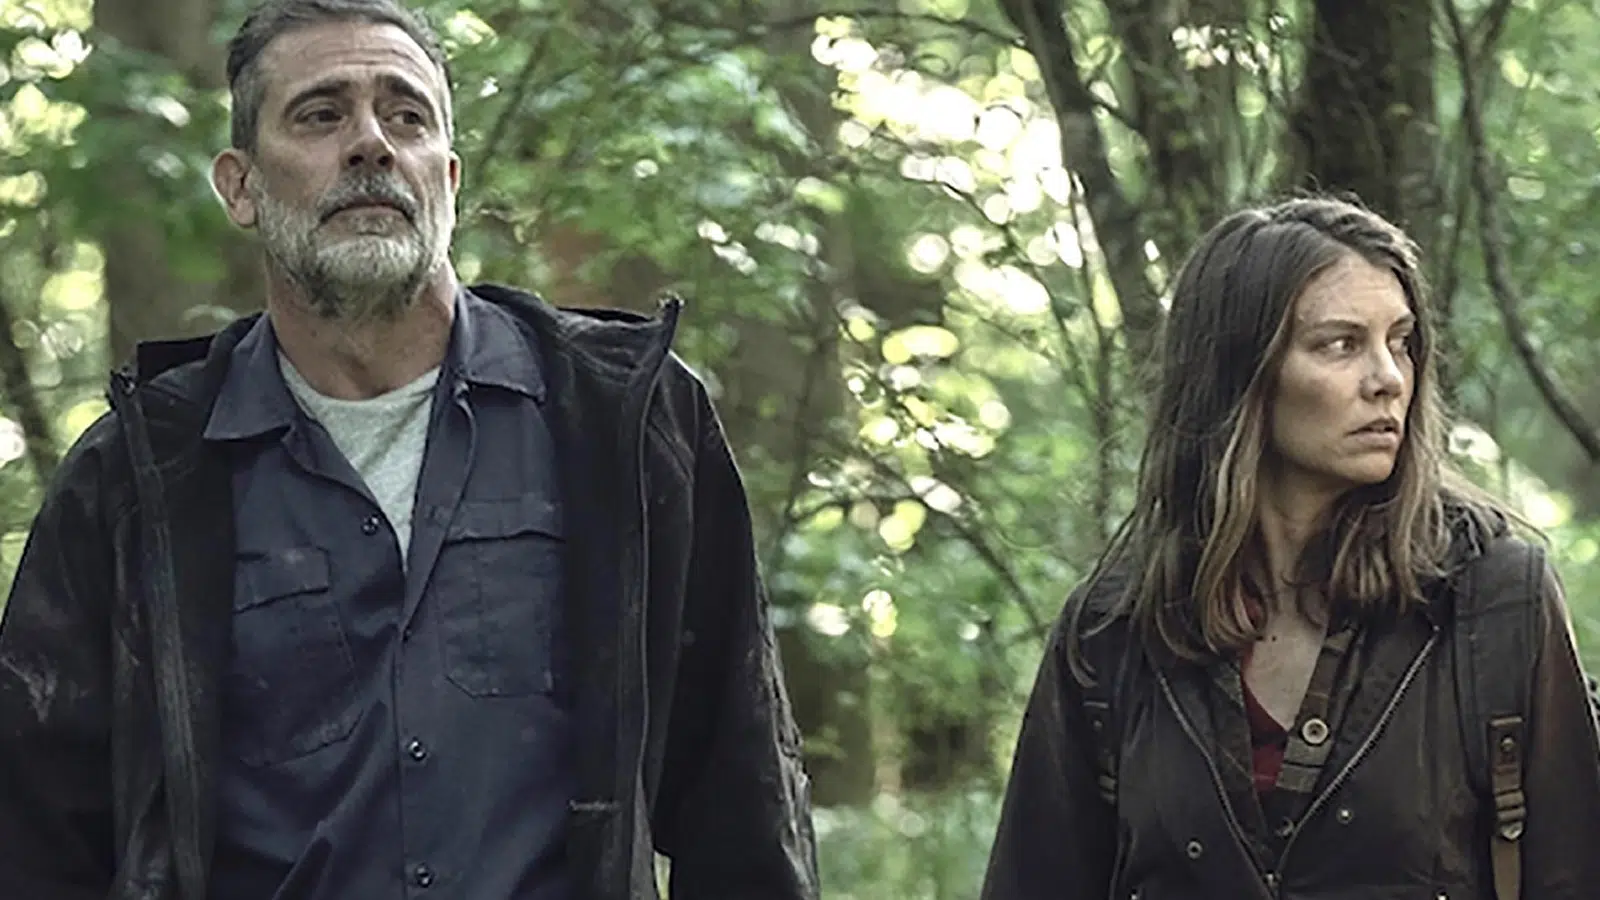 Feature image of Maggie and Negan from The Walking Dead 4258679869